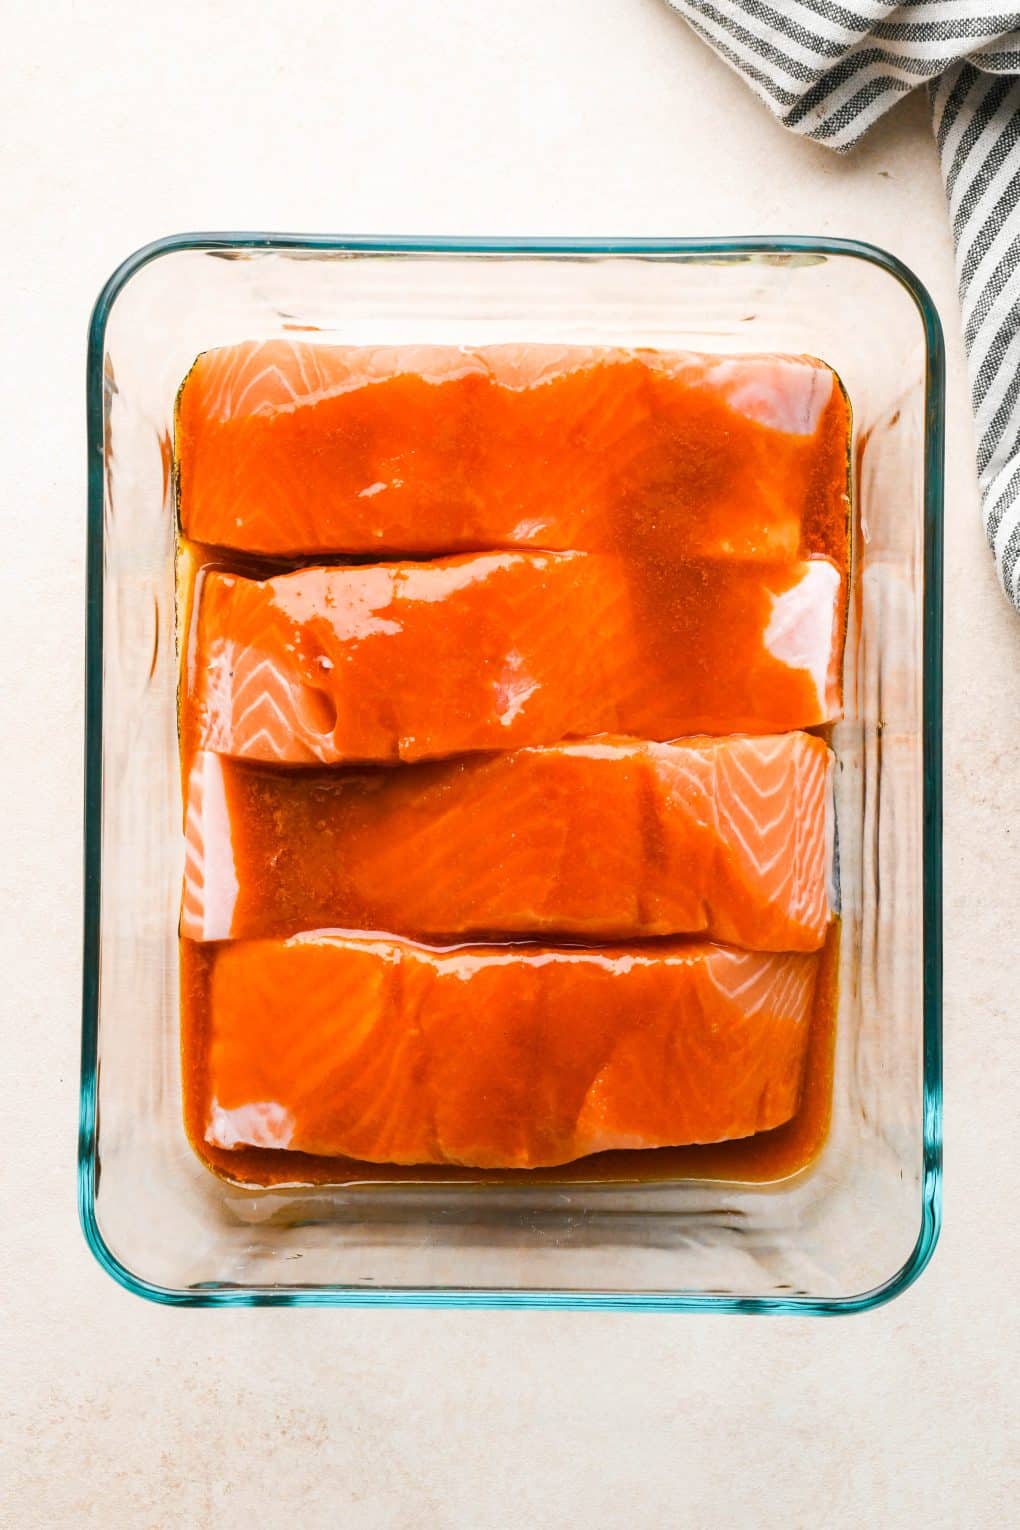 How to make baked buffalo salmon: Buffalo sauce poured over salmon fillets in a glass tupperware.